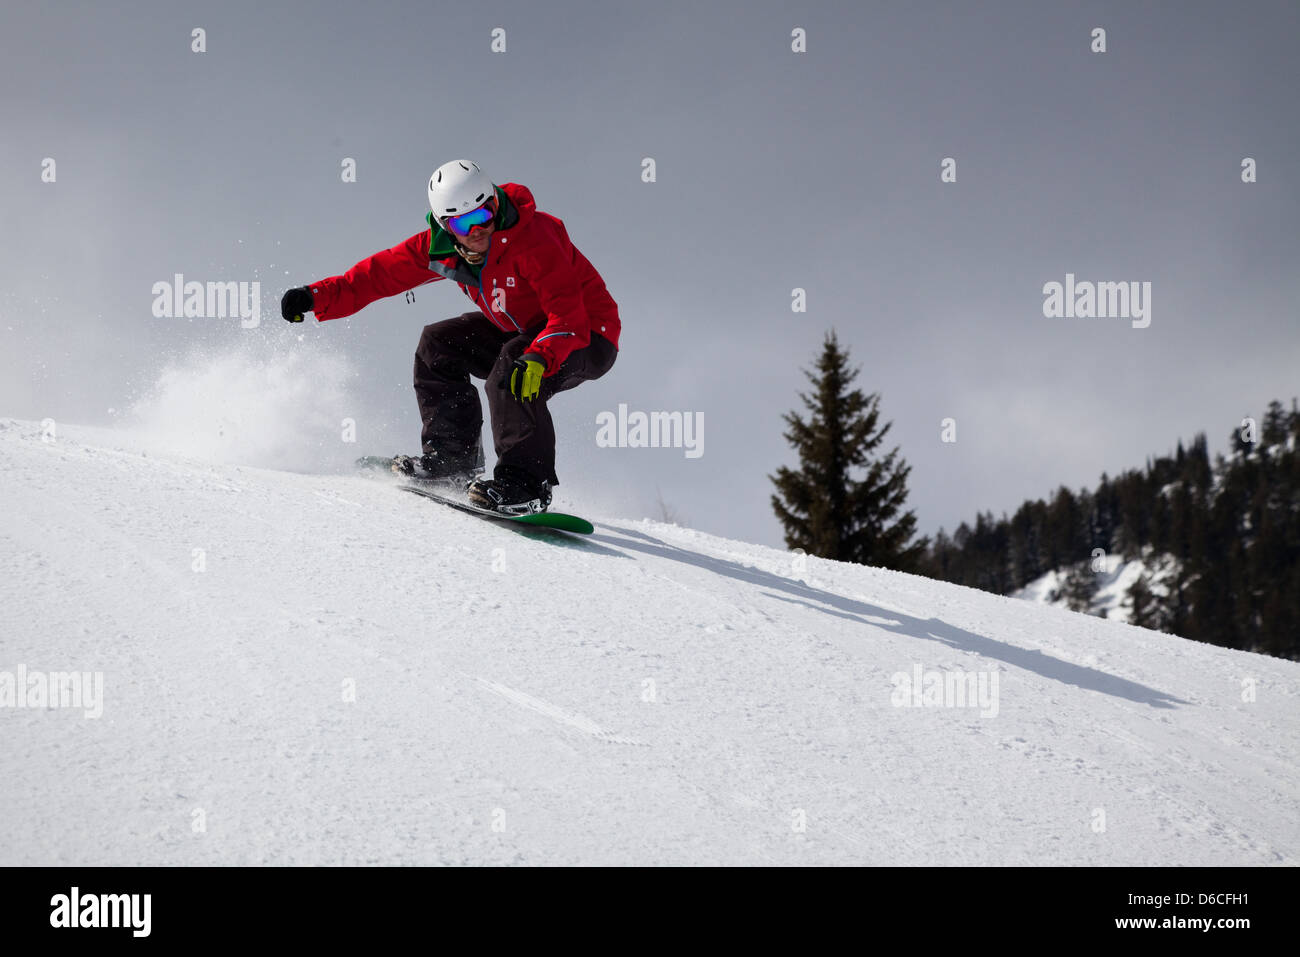 A snowboarder lands after making a jump at Red Mountain resort, Canada Stock Photo